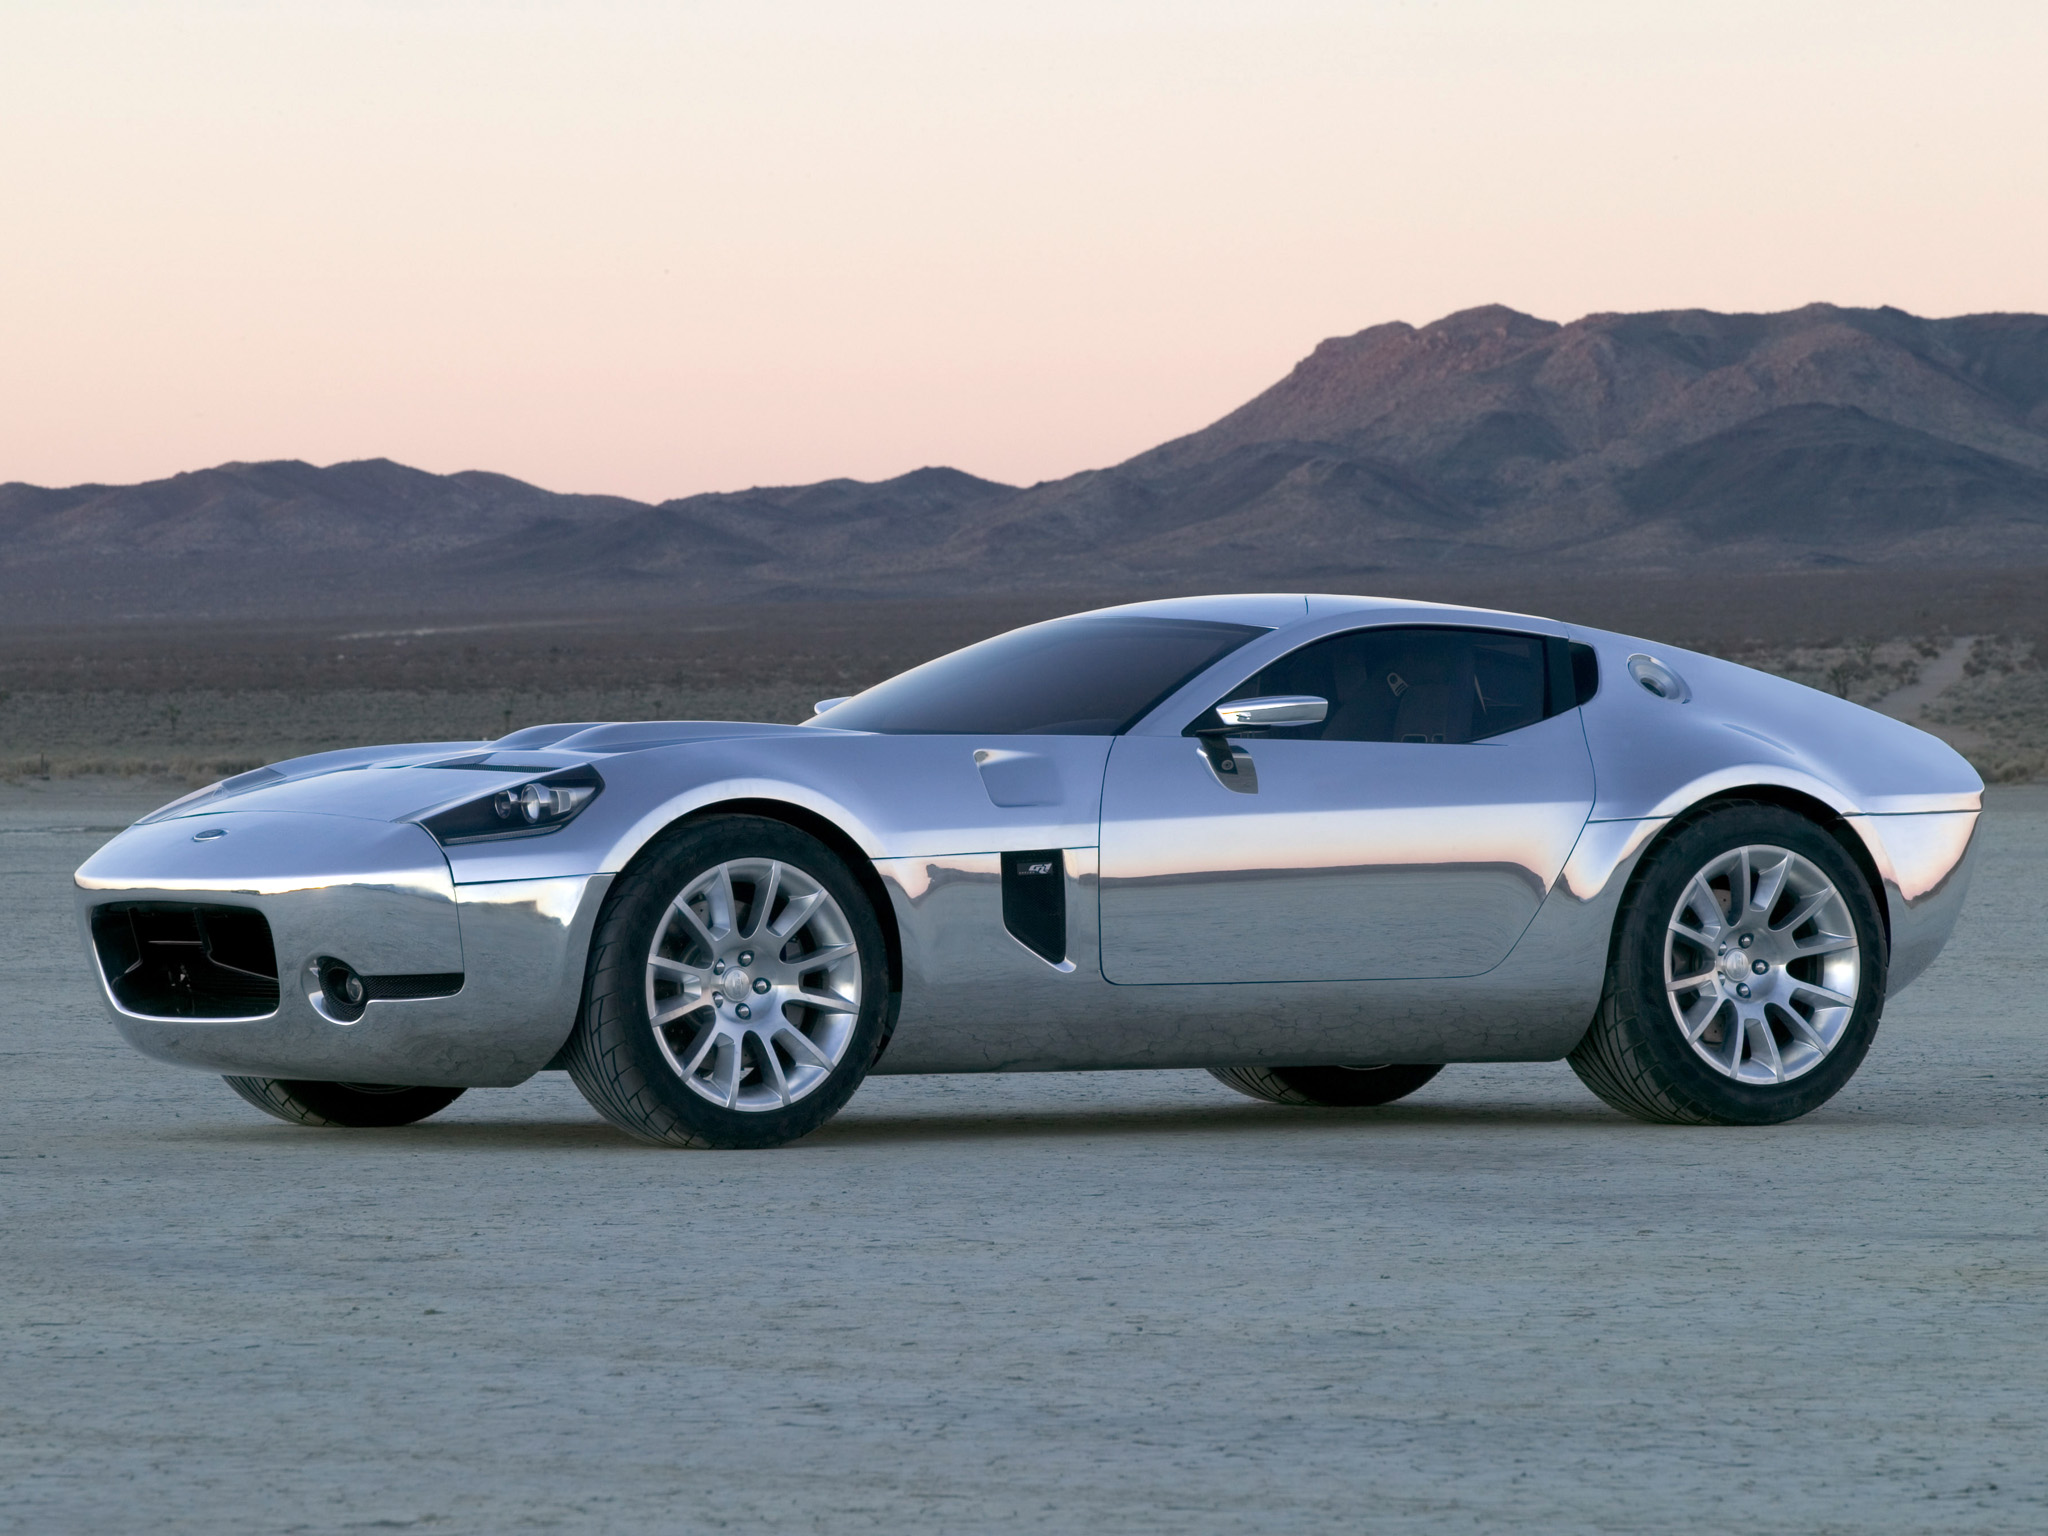 2005, Ford, Shelby, Gr 1, Concept, Supercar, Supercars Wallpaper